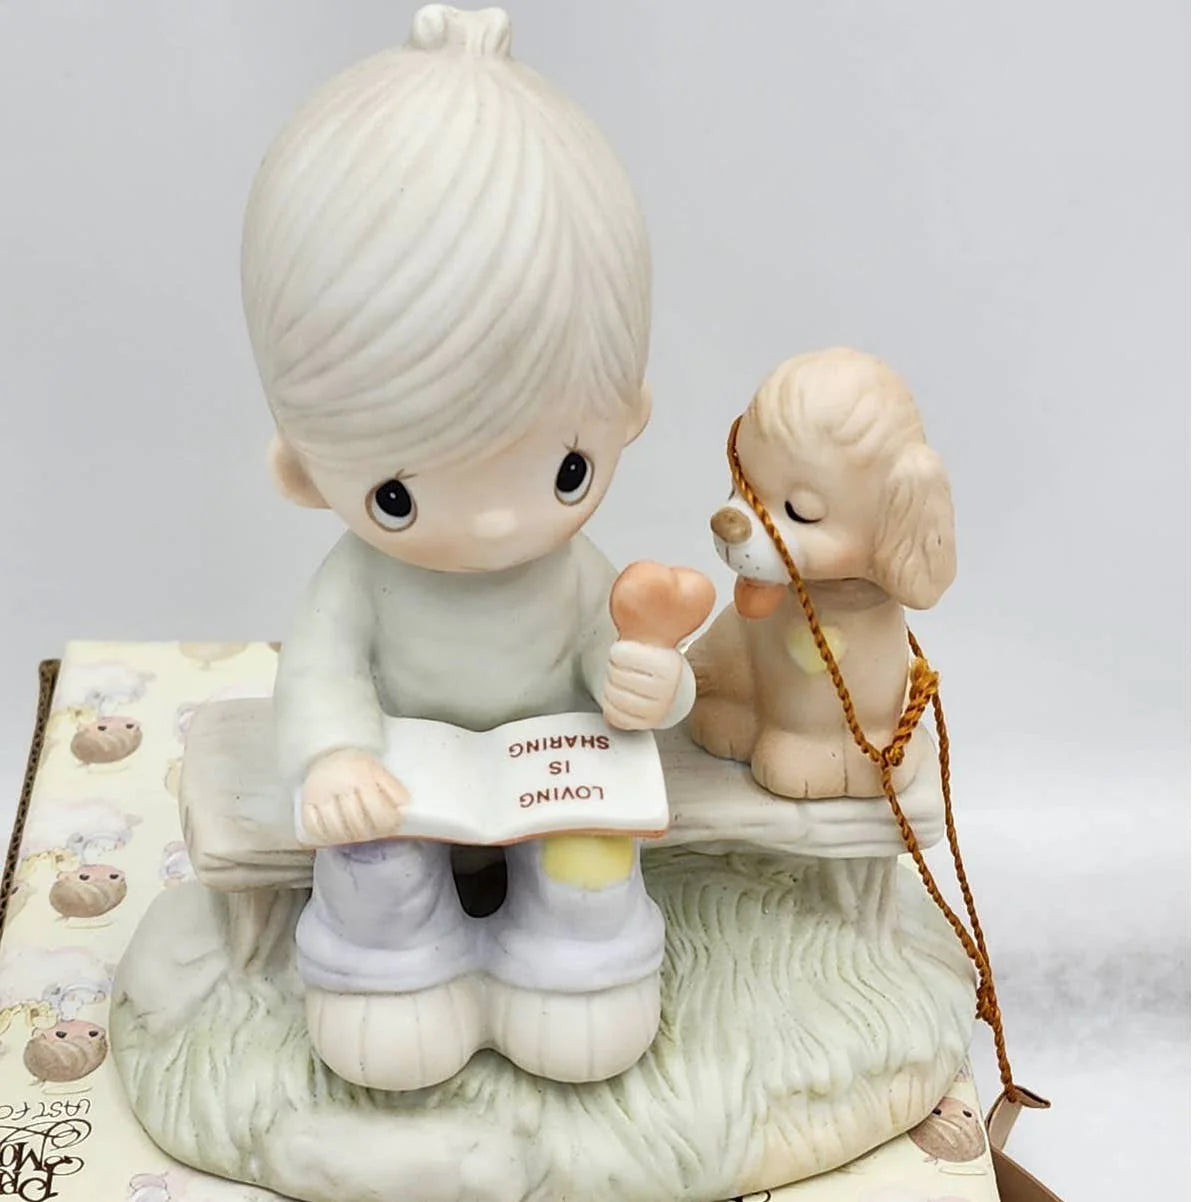 Finding Faith and Inspiration with Precious Moments Figurines: Exploring the Religious Message Behind These Cherished Collectibles